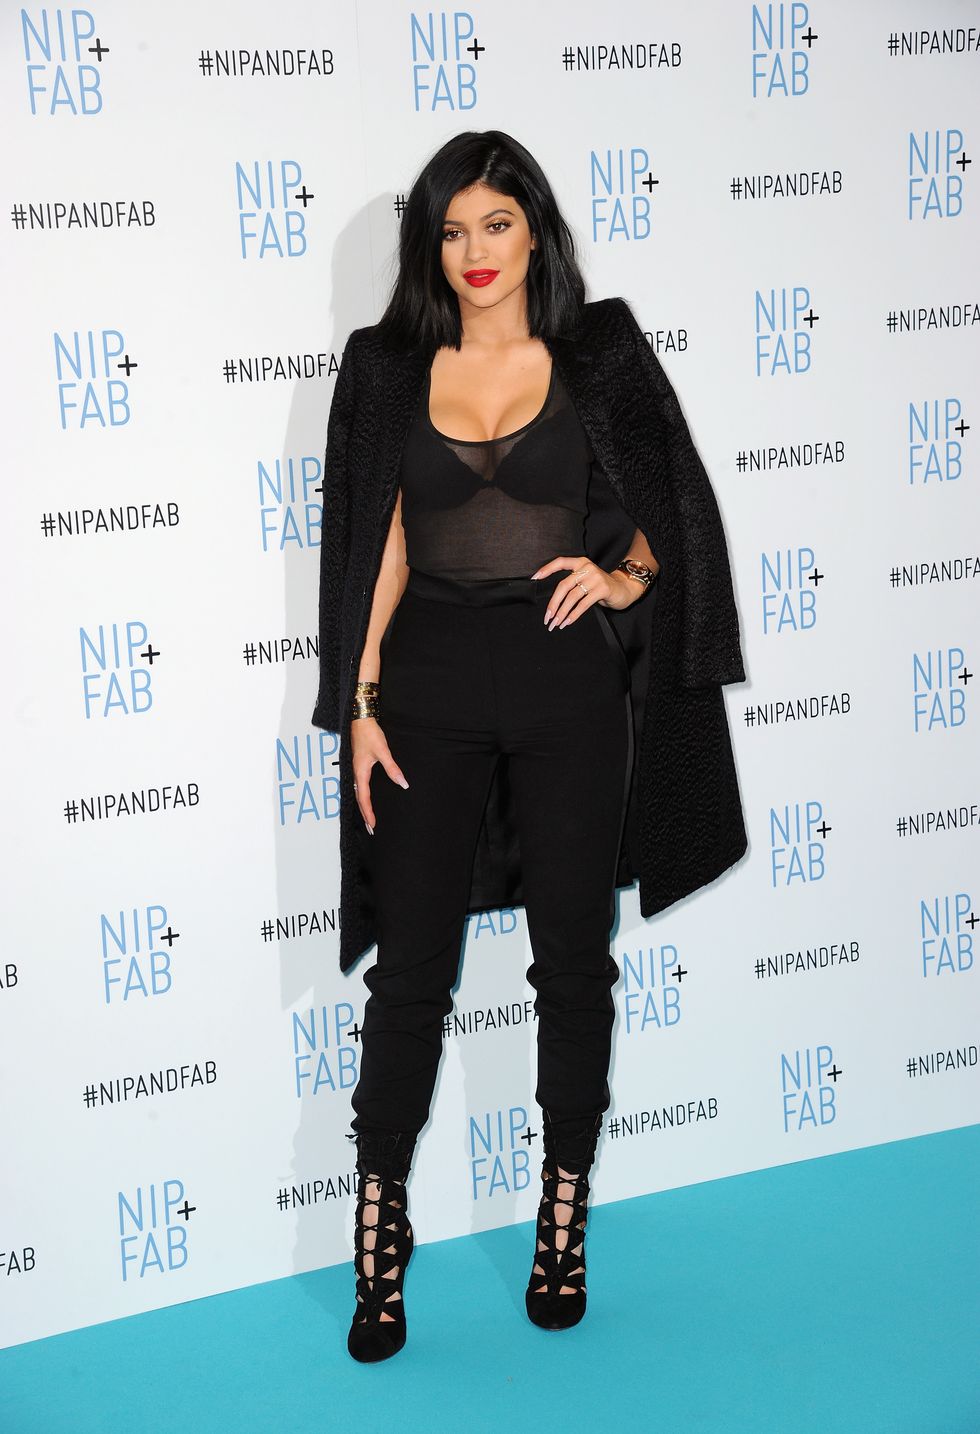 Kylie Jenner in black plunging outfit at Nip+Fab photocall